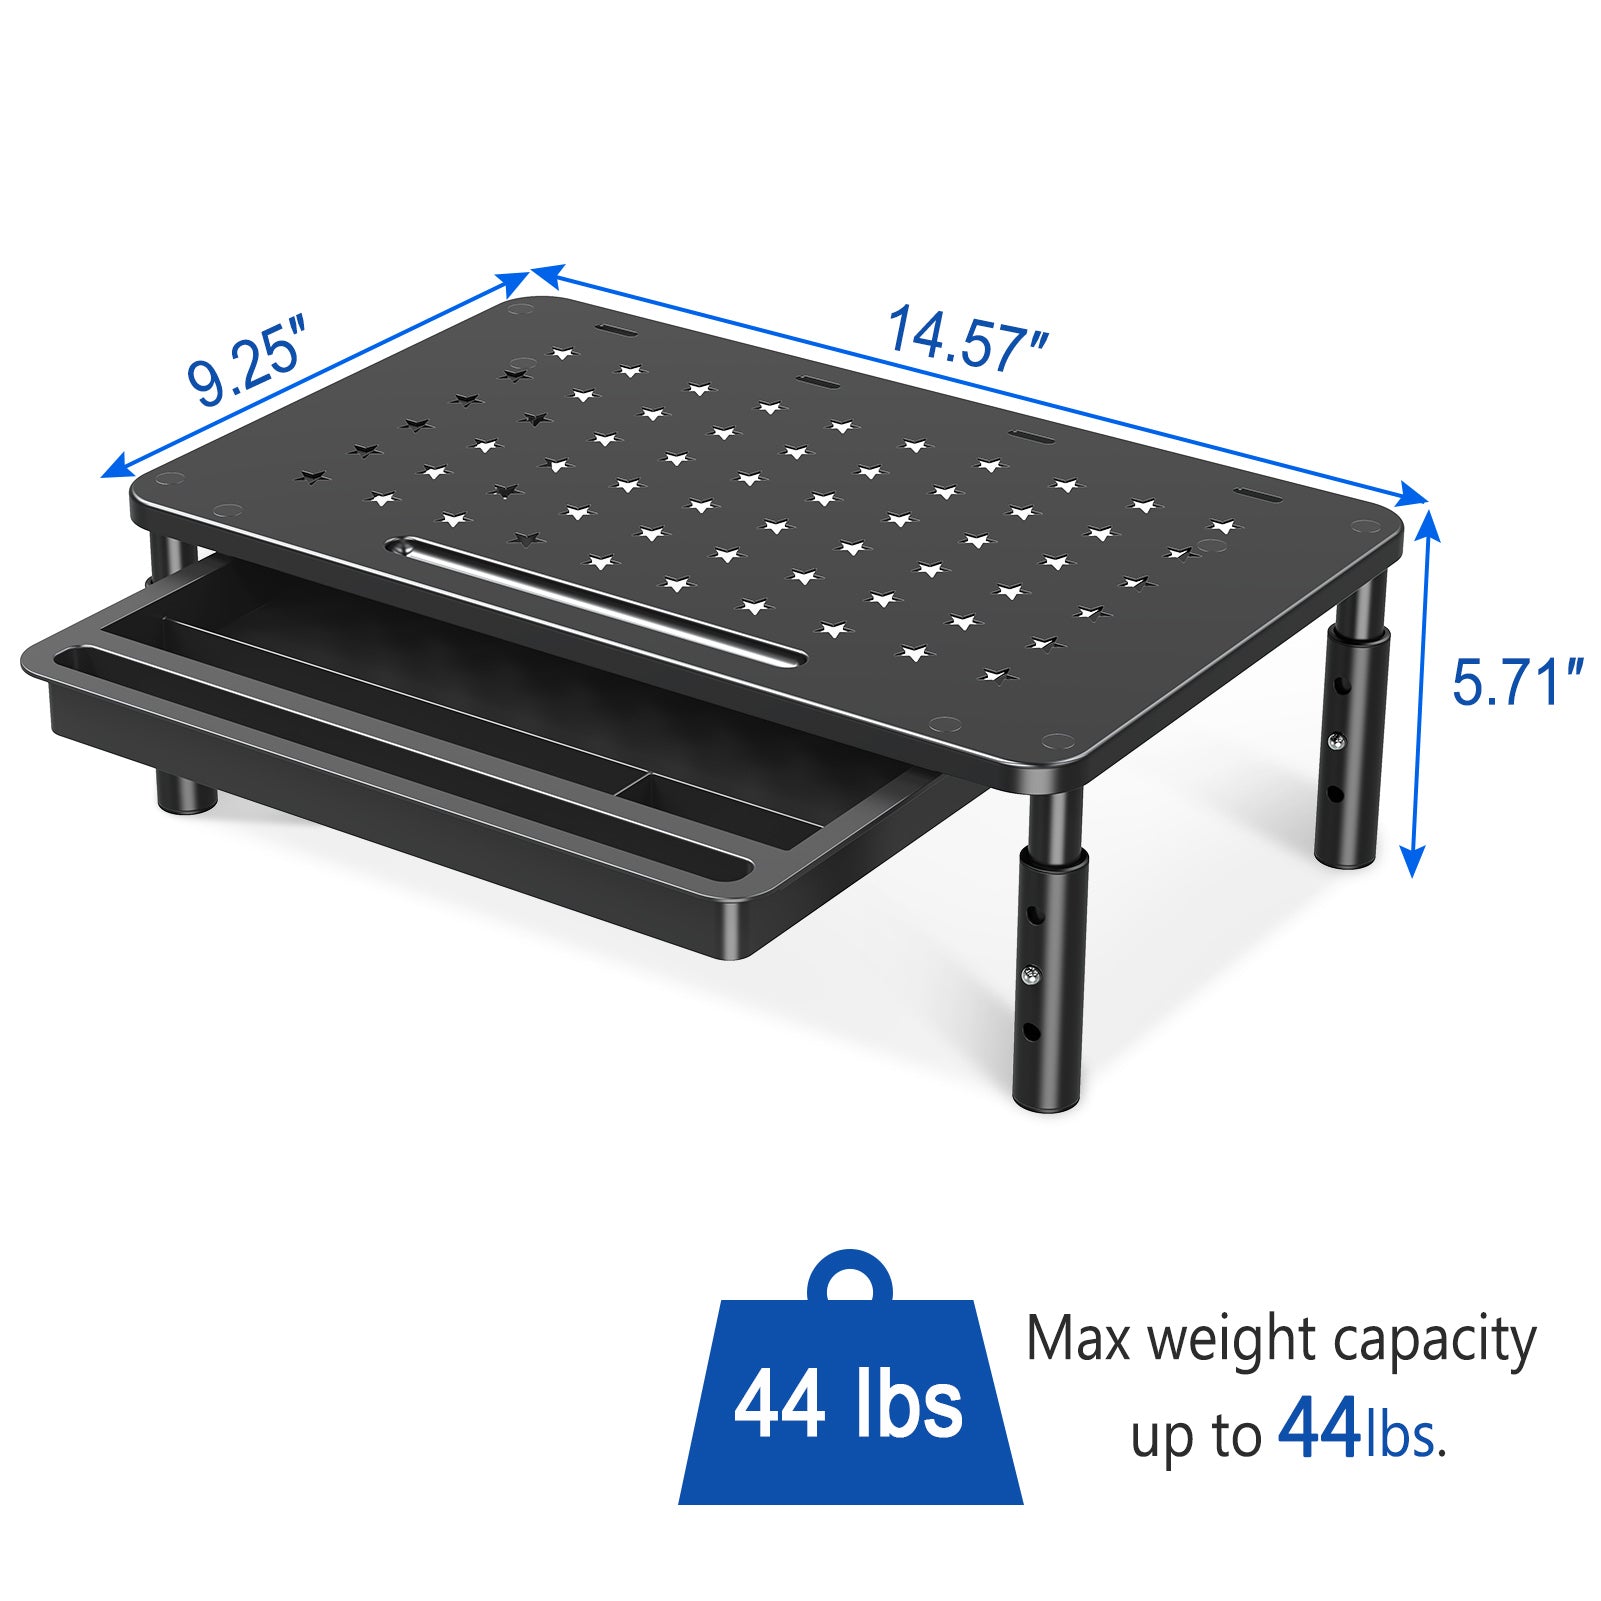 WOKAMALL Height Adjustable Monitor Stand with Divided Drawer